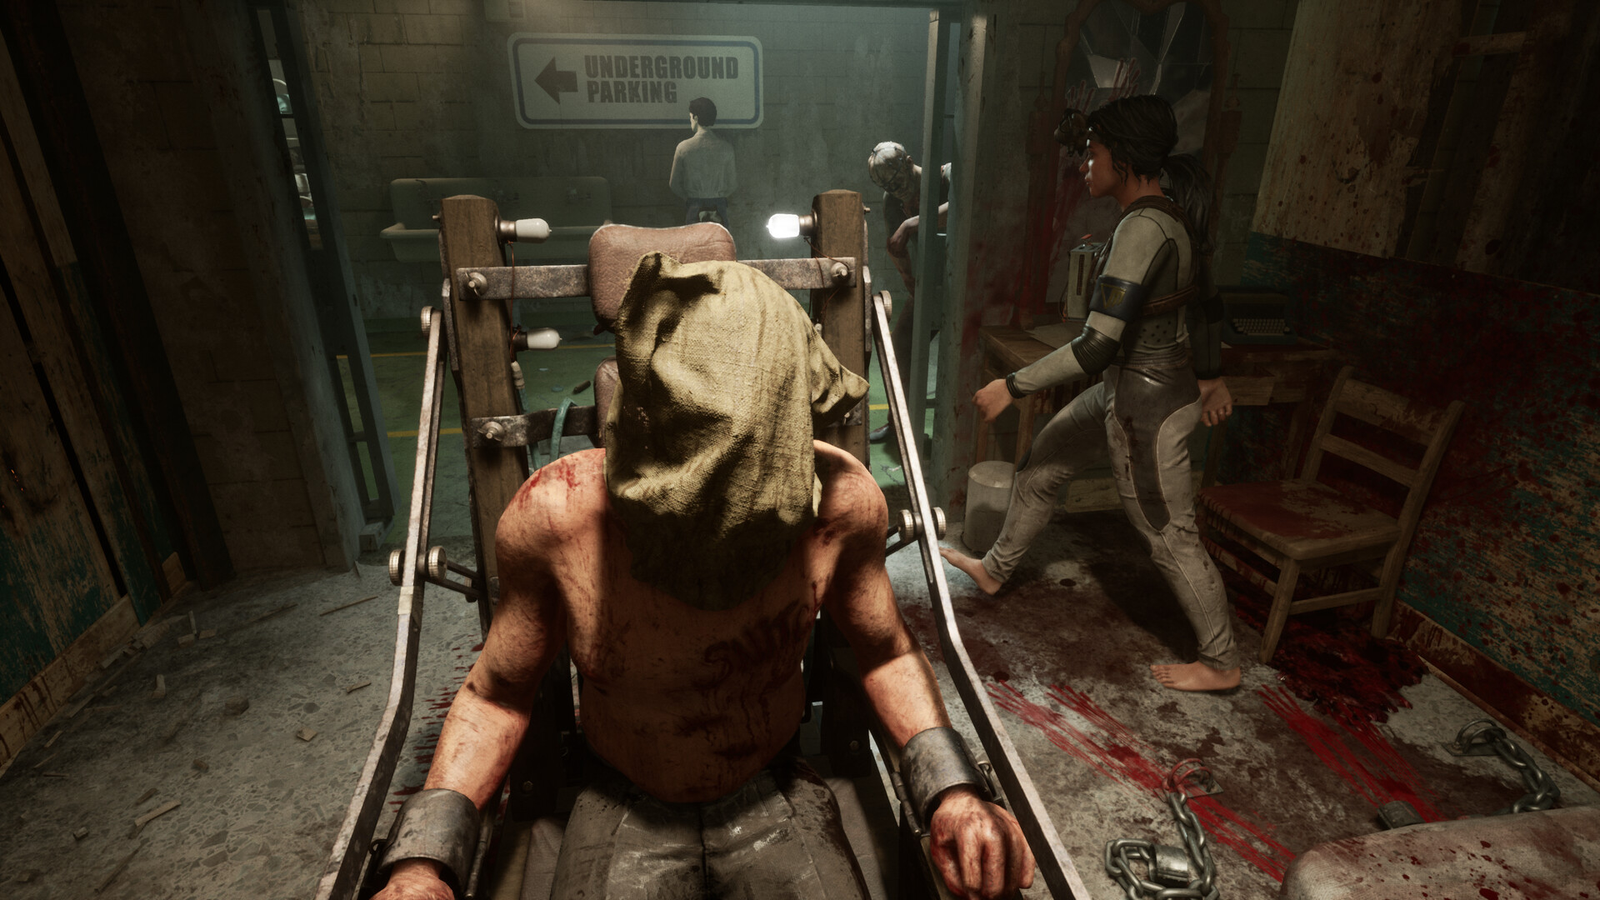 Red Barrels on X: For everyone asking about consoles, we are working to  have The Outlast Trials be playable on as many platforms as possible with  cross-platform play but no cross-progression. This